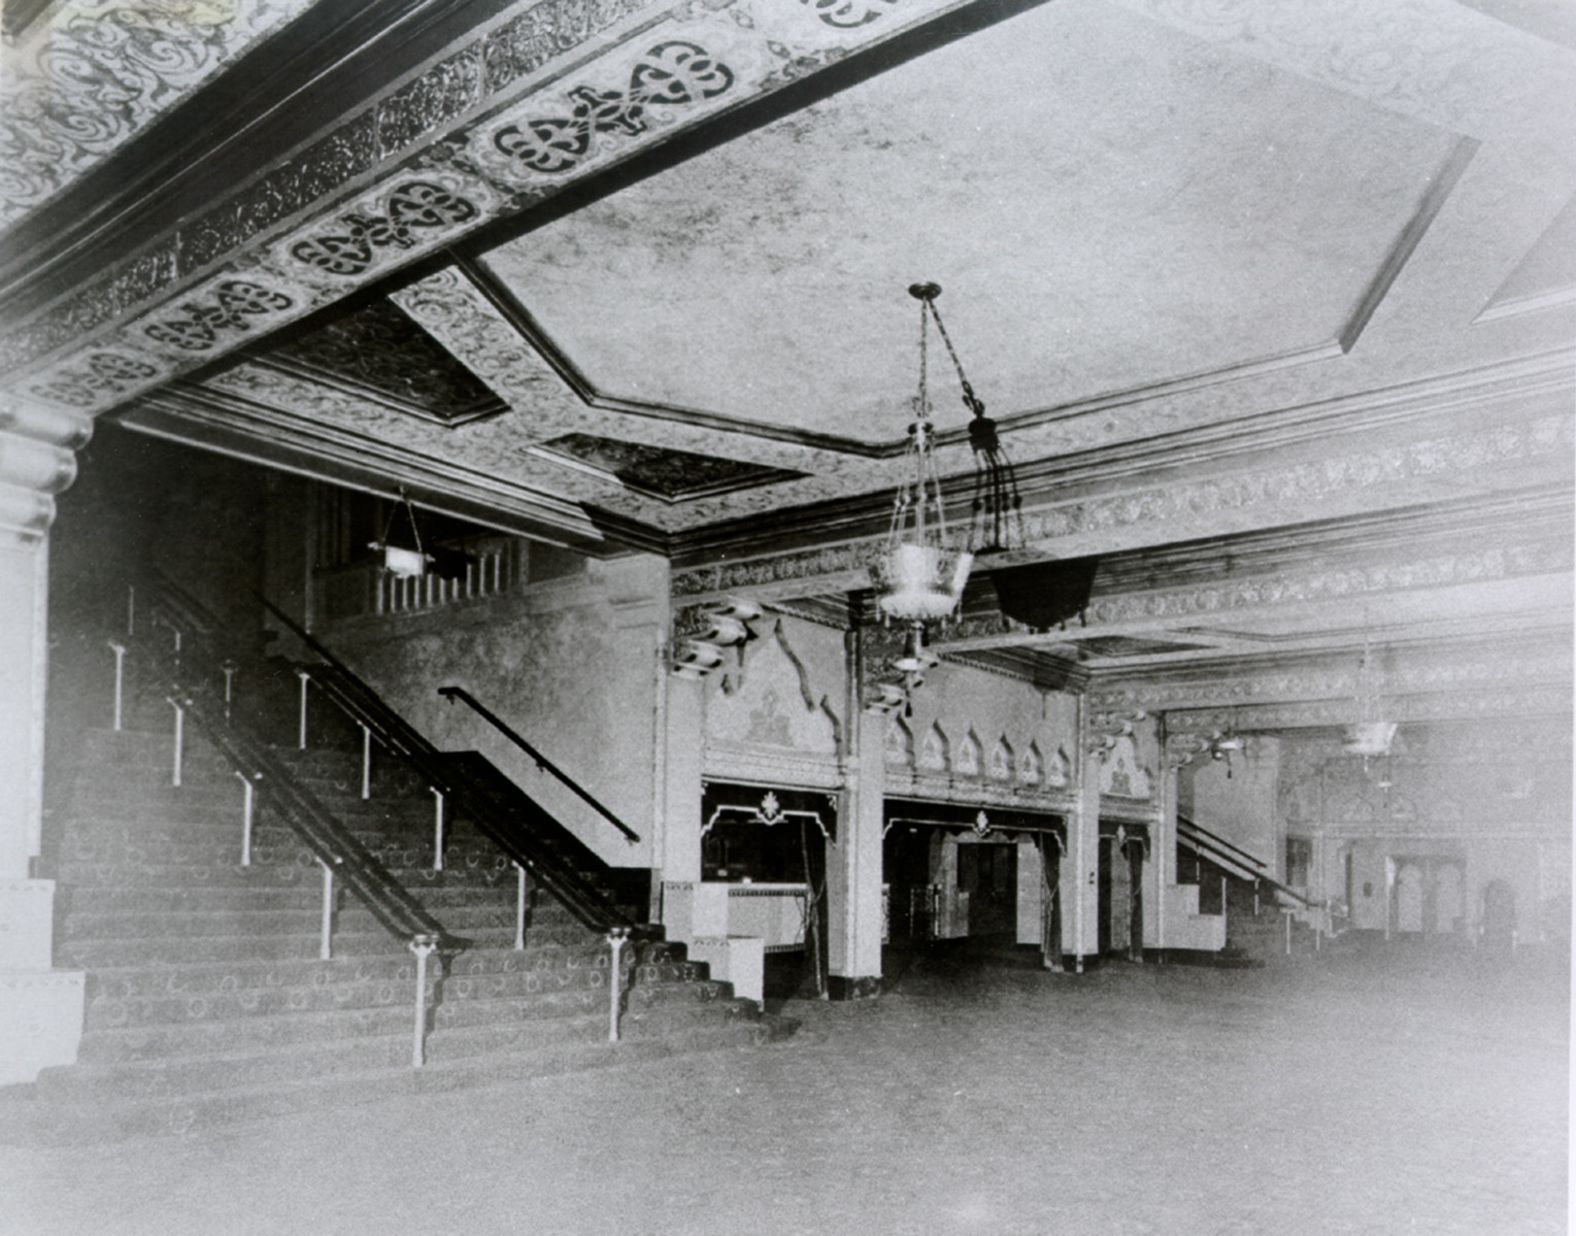 Shortly before its completion, the Shriners, over-budget and out of funds, decided to lease the theatre to movie mogul William Fox, the founder of the Fox Film Corporation who had since turned his attention to creating movie palaces across the country.   Finishing the project with the entrepreneur's backing cost more than $3 million, the equivalent of nearly $40 million today.